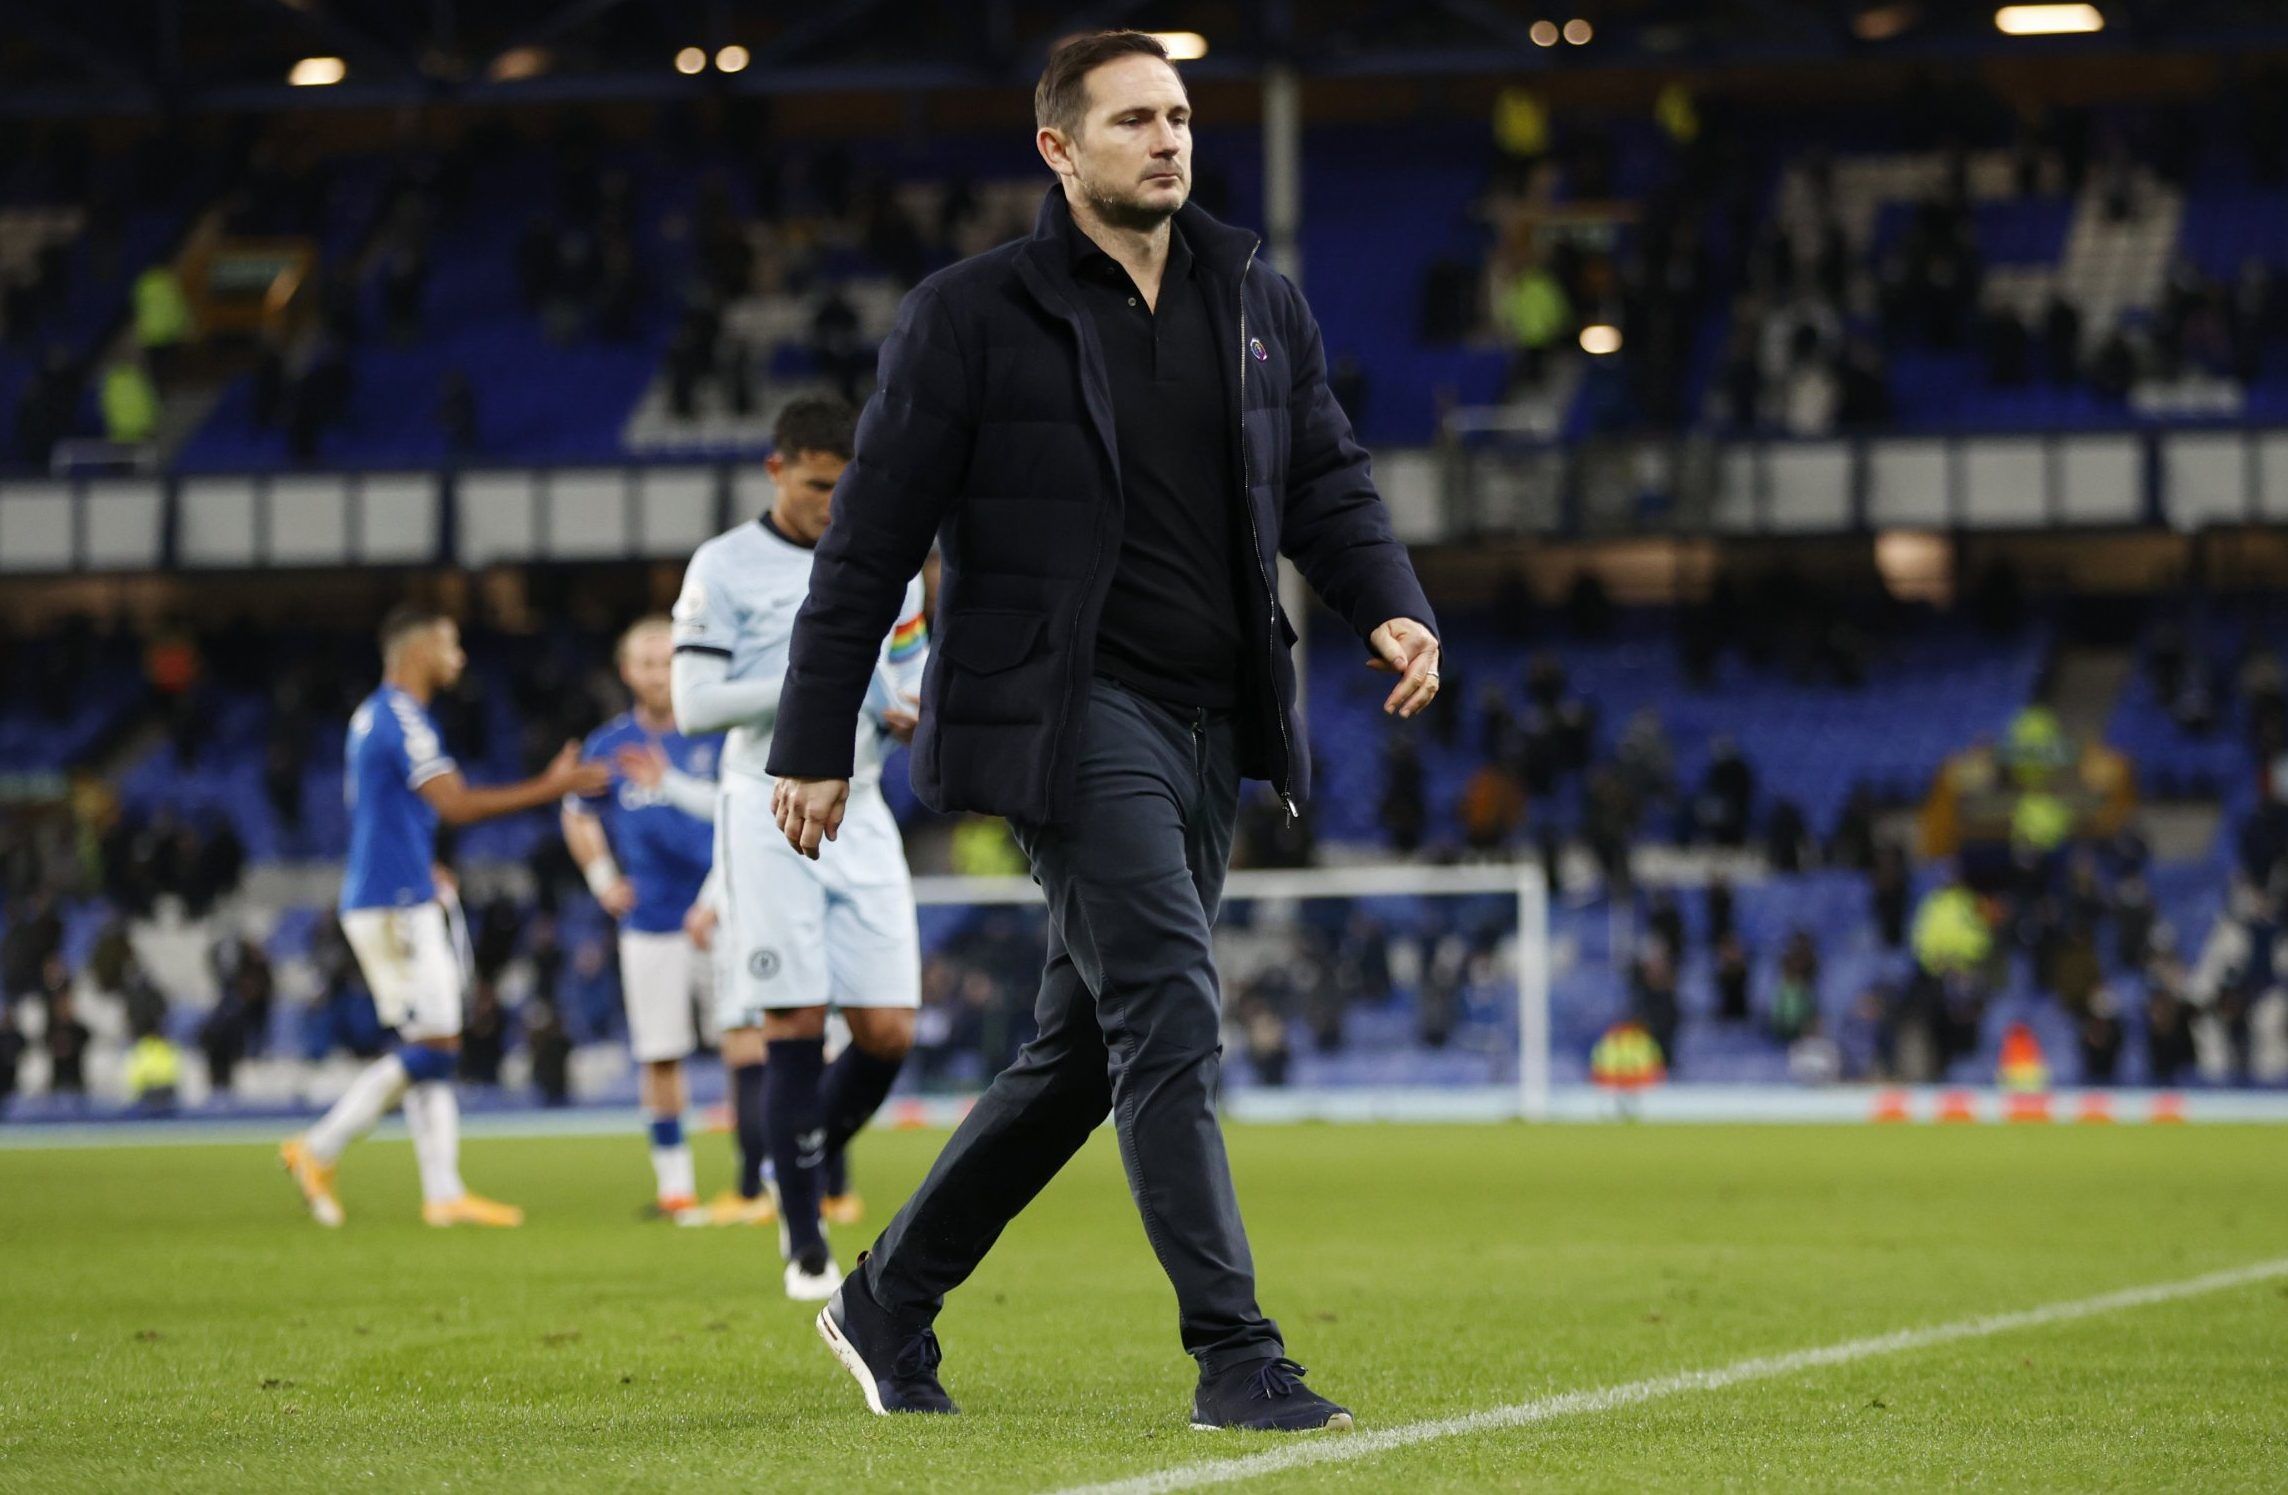 former chelsea manager walks off after match against everton at goodison park premier league